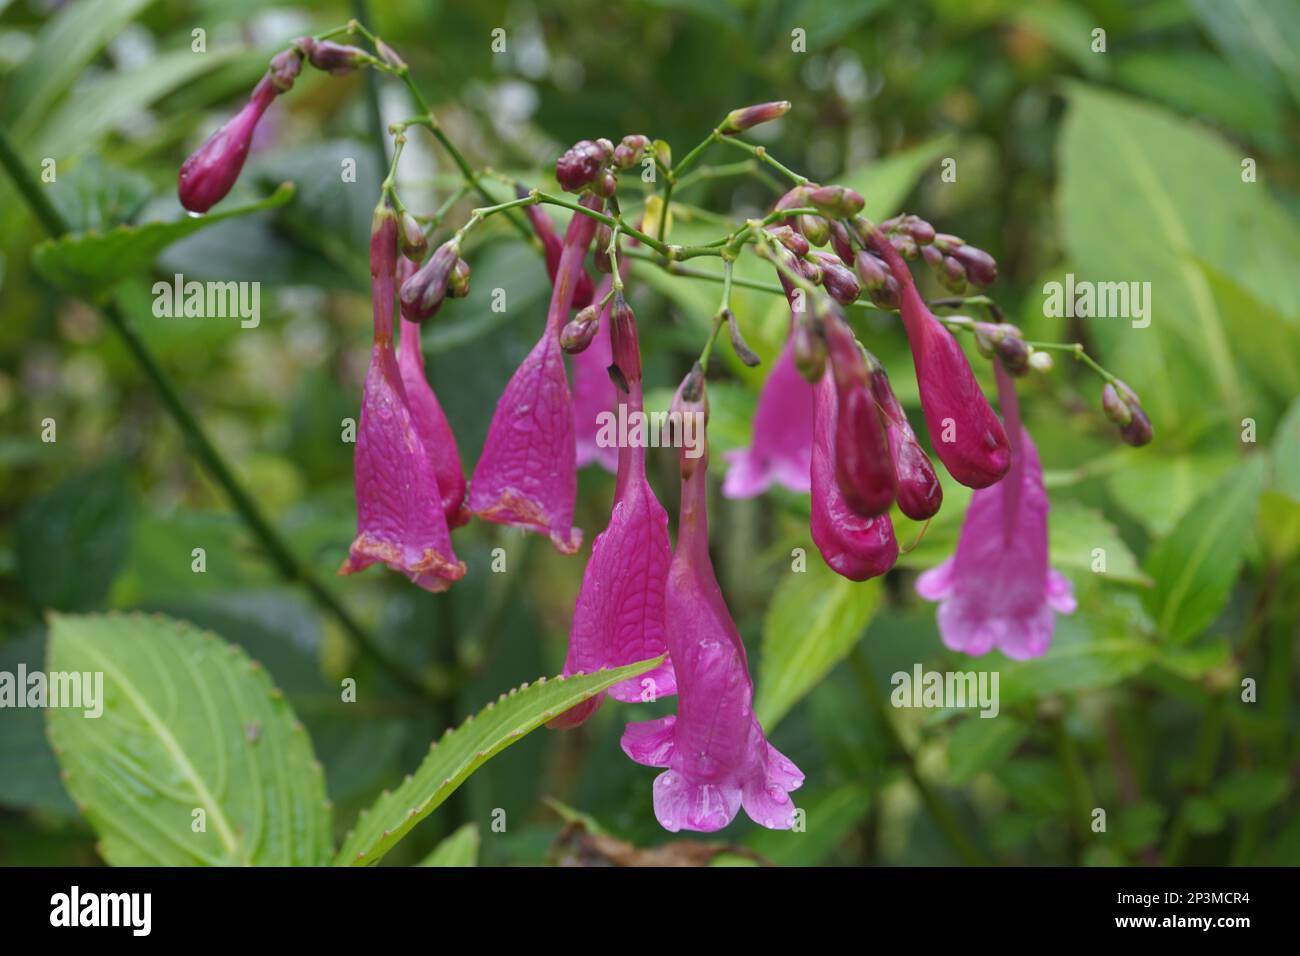 Strobilanthes cusia, also known as Assam indigo or Chinese rain bell, is a perennial flowering plant of the family Acanthaceae. Native to South Asia, Stock Photo